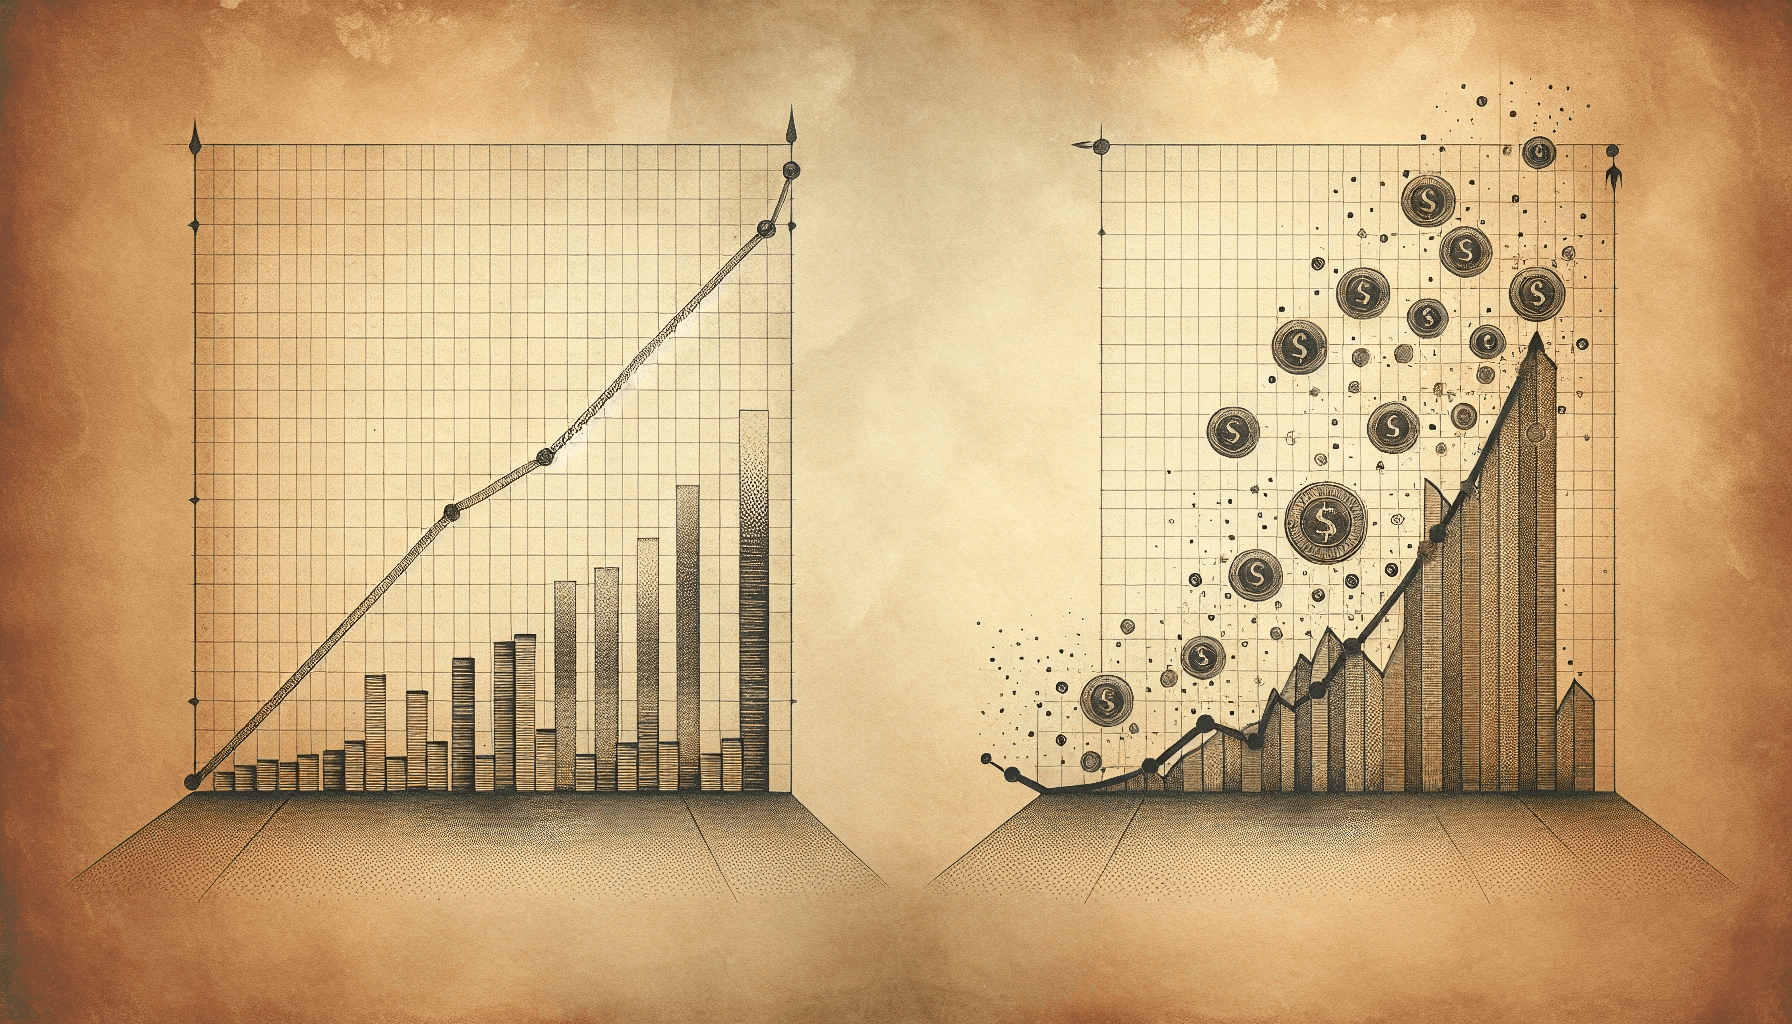 Illustration showing the comparison between exponential and linear growth